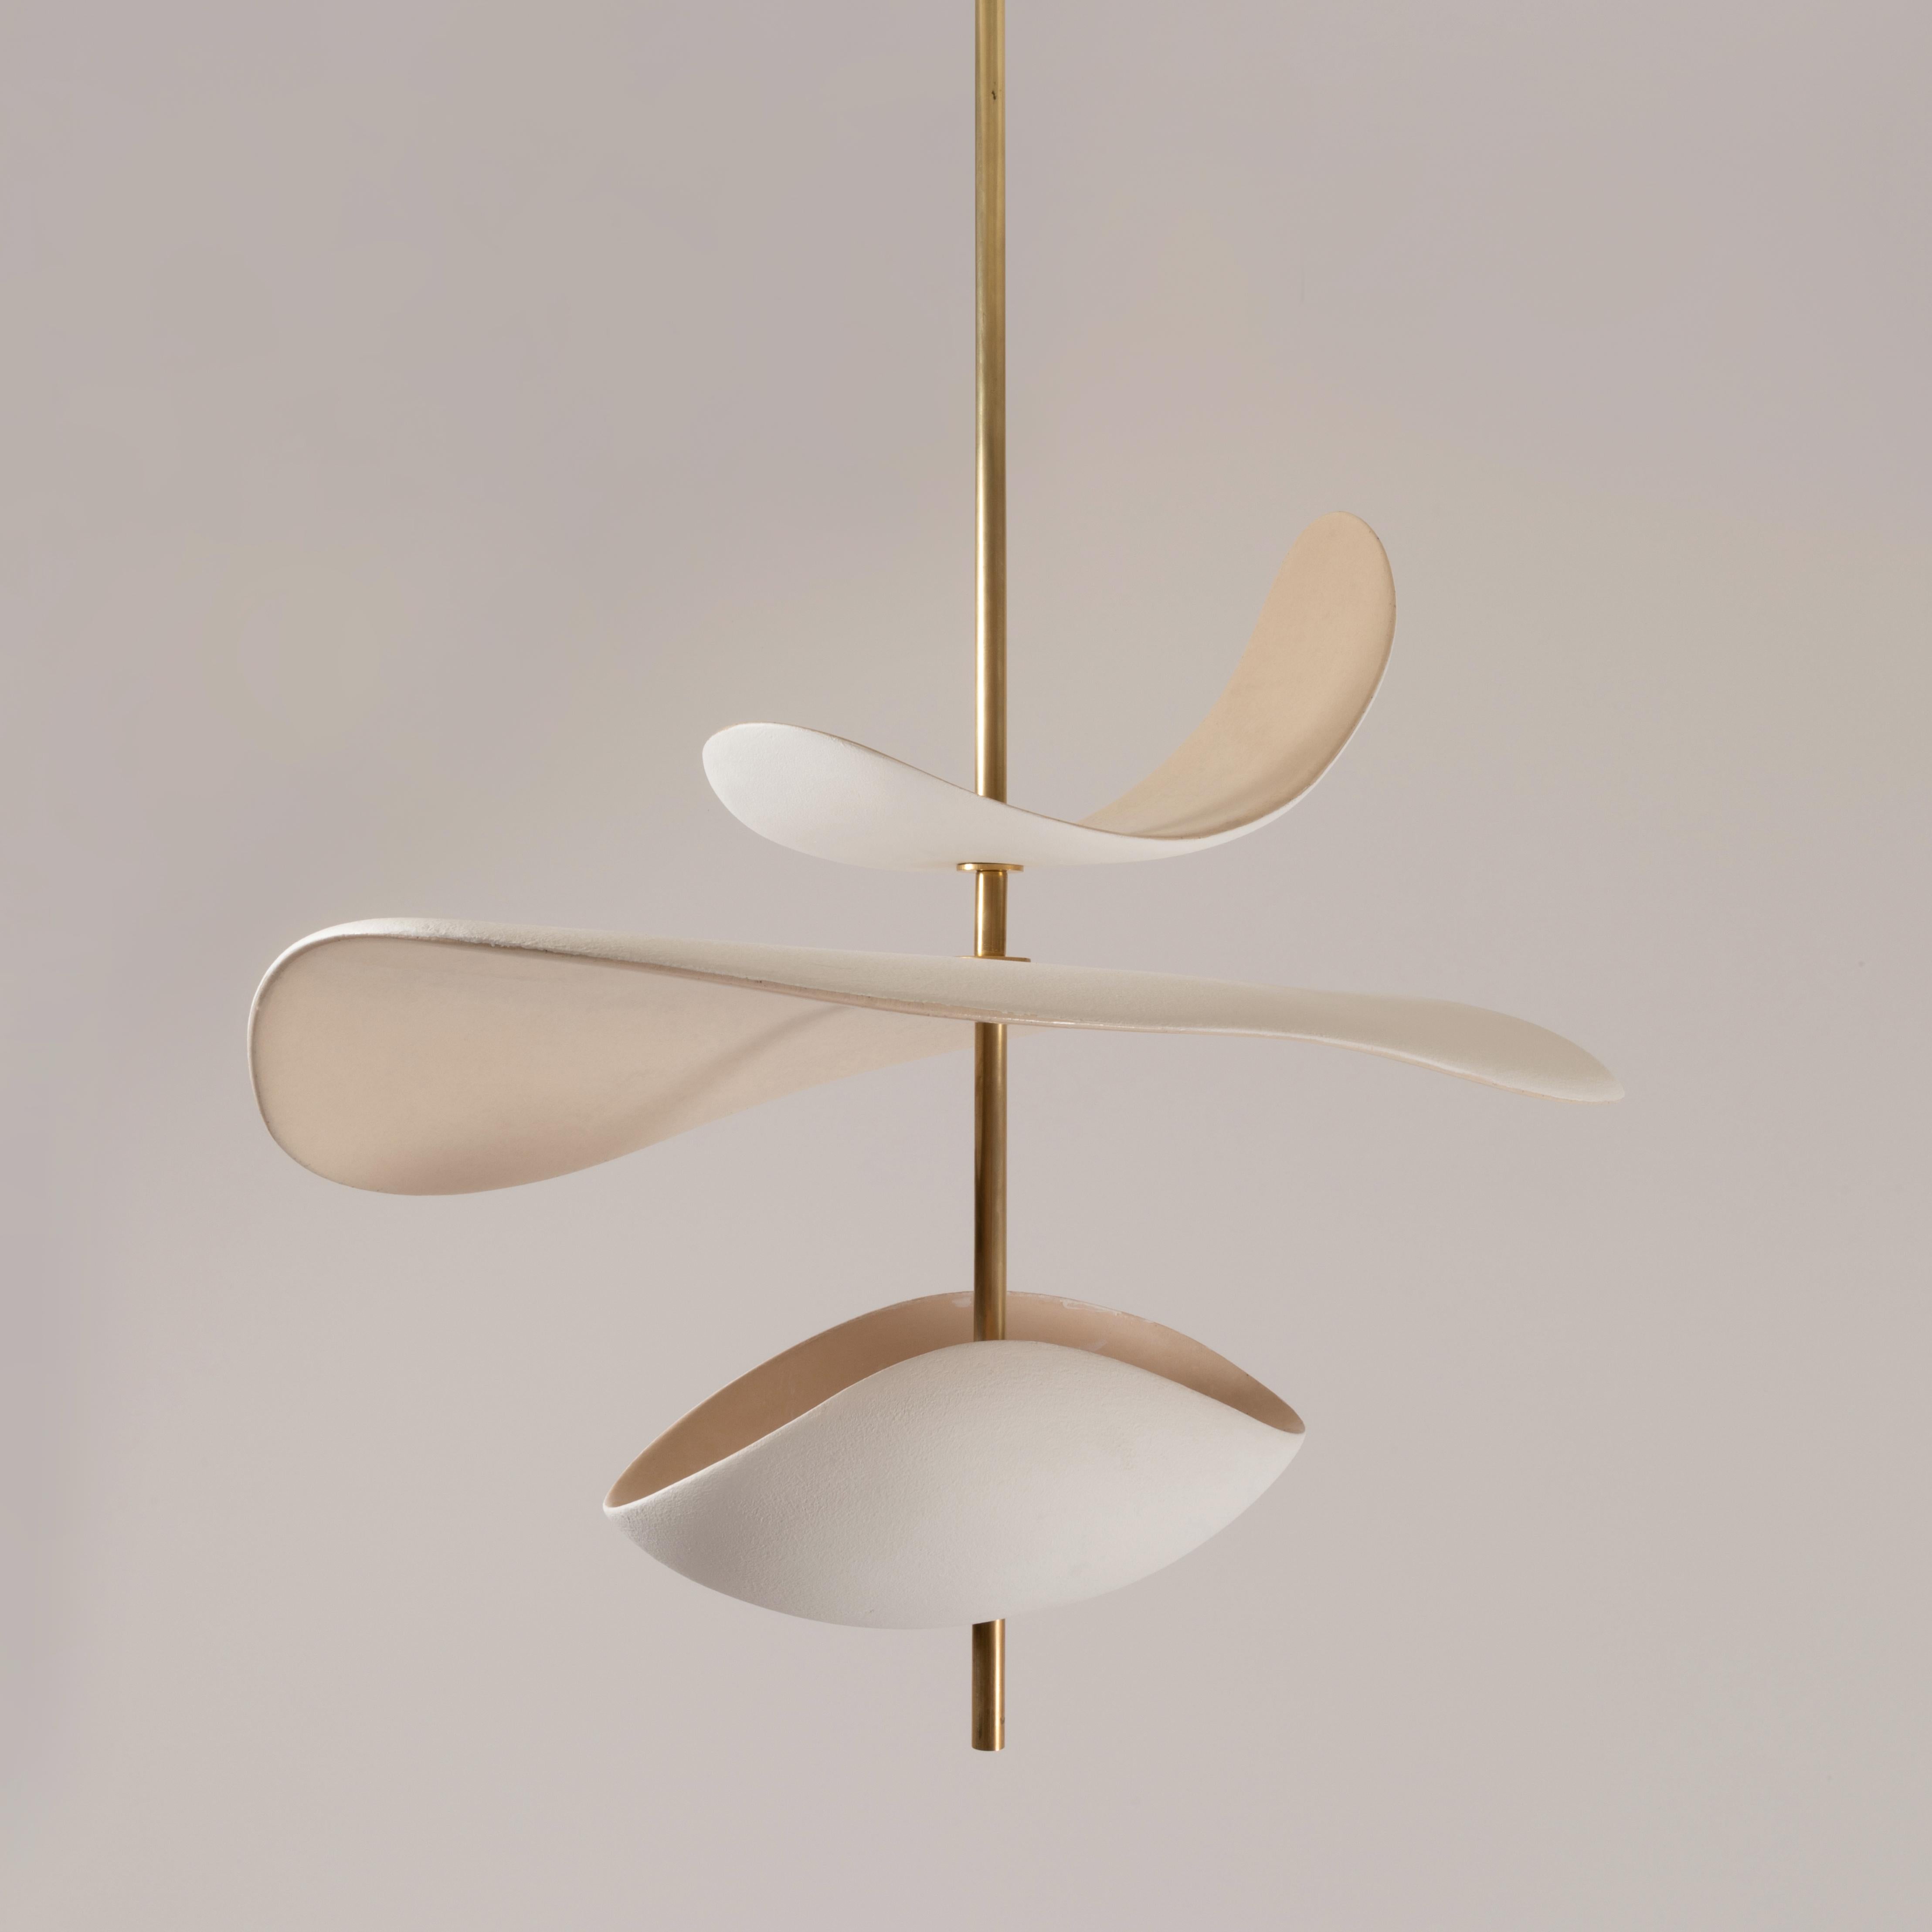 Free Form B Pendant by Elsa Foulon
Dimensions: D 75 x H 65 cm 
Materials: Ceramic, Brass
Unique Piece
Also available in different options: Bowl or Cup (lower part).
The height is min 65 cm and customizable to the customer's size. Please contact